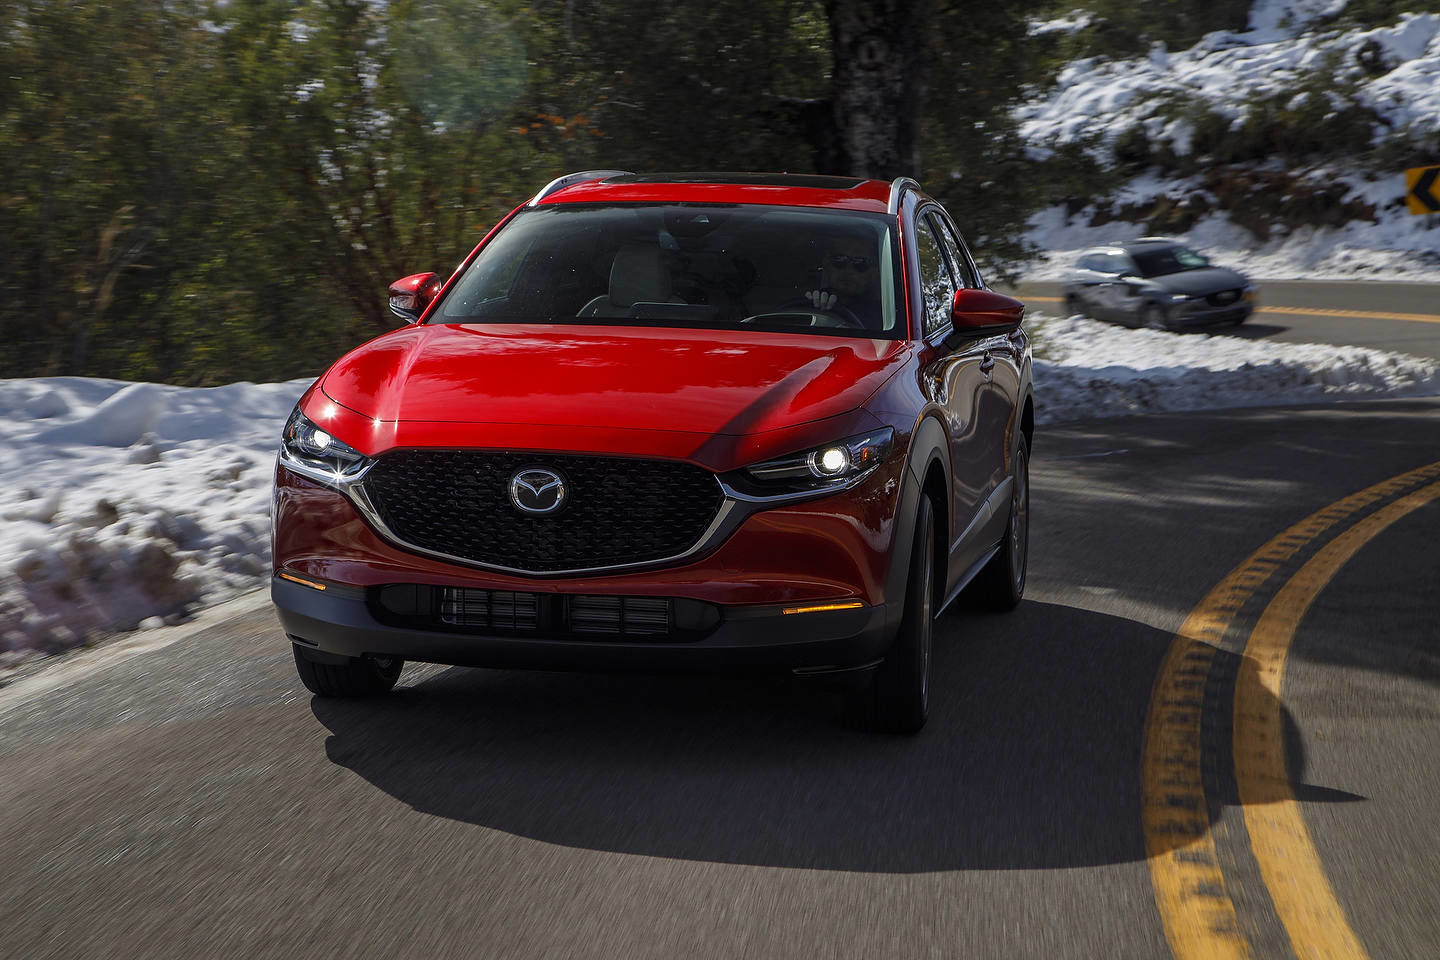 Why You Should Consider Mazda's i-ActivSense on Your Next Pre-Owned Vehicle